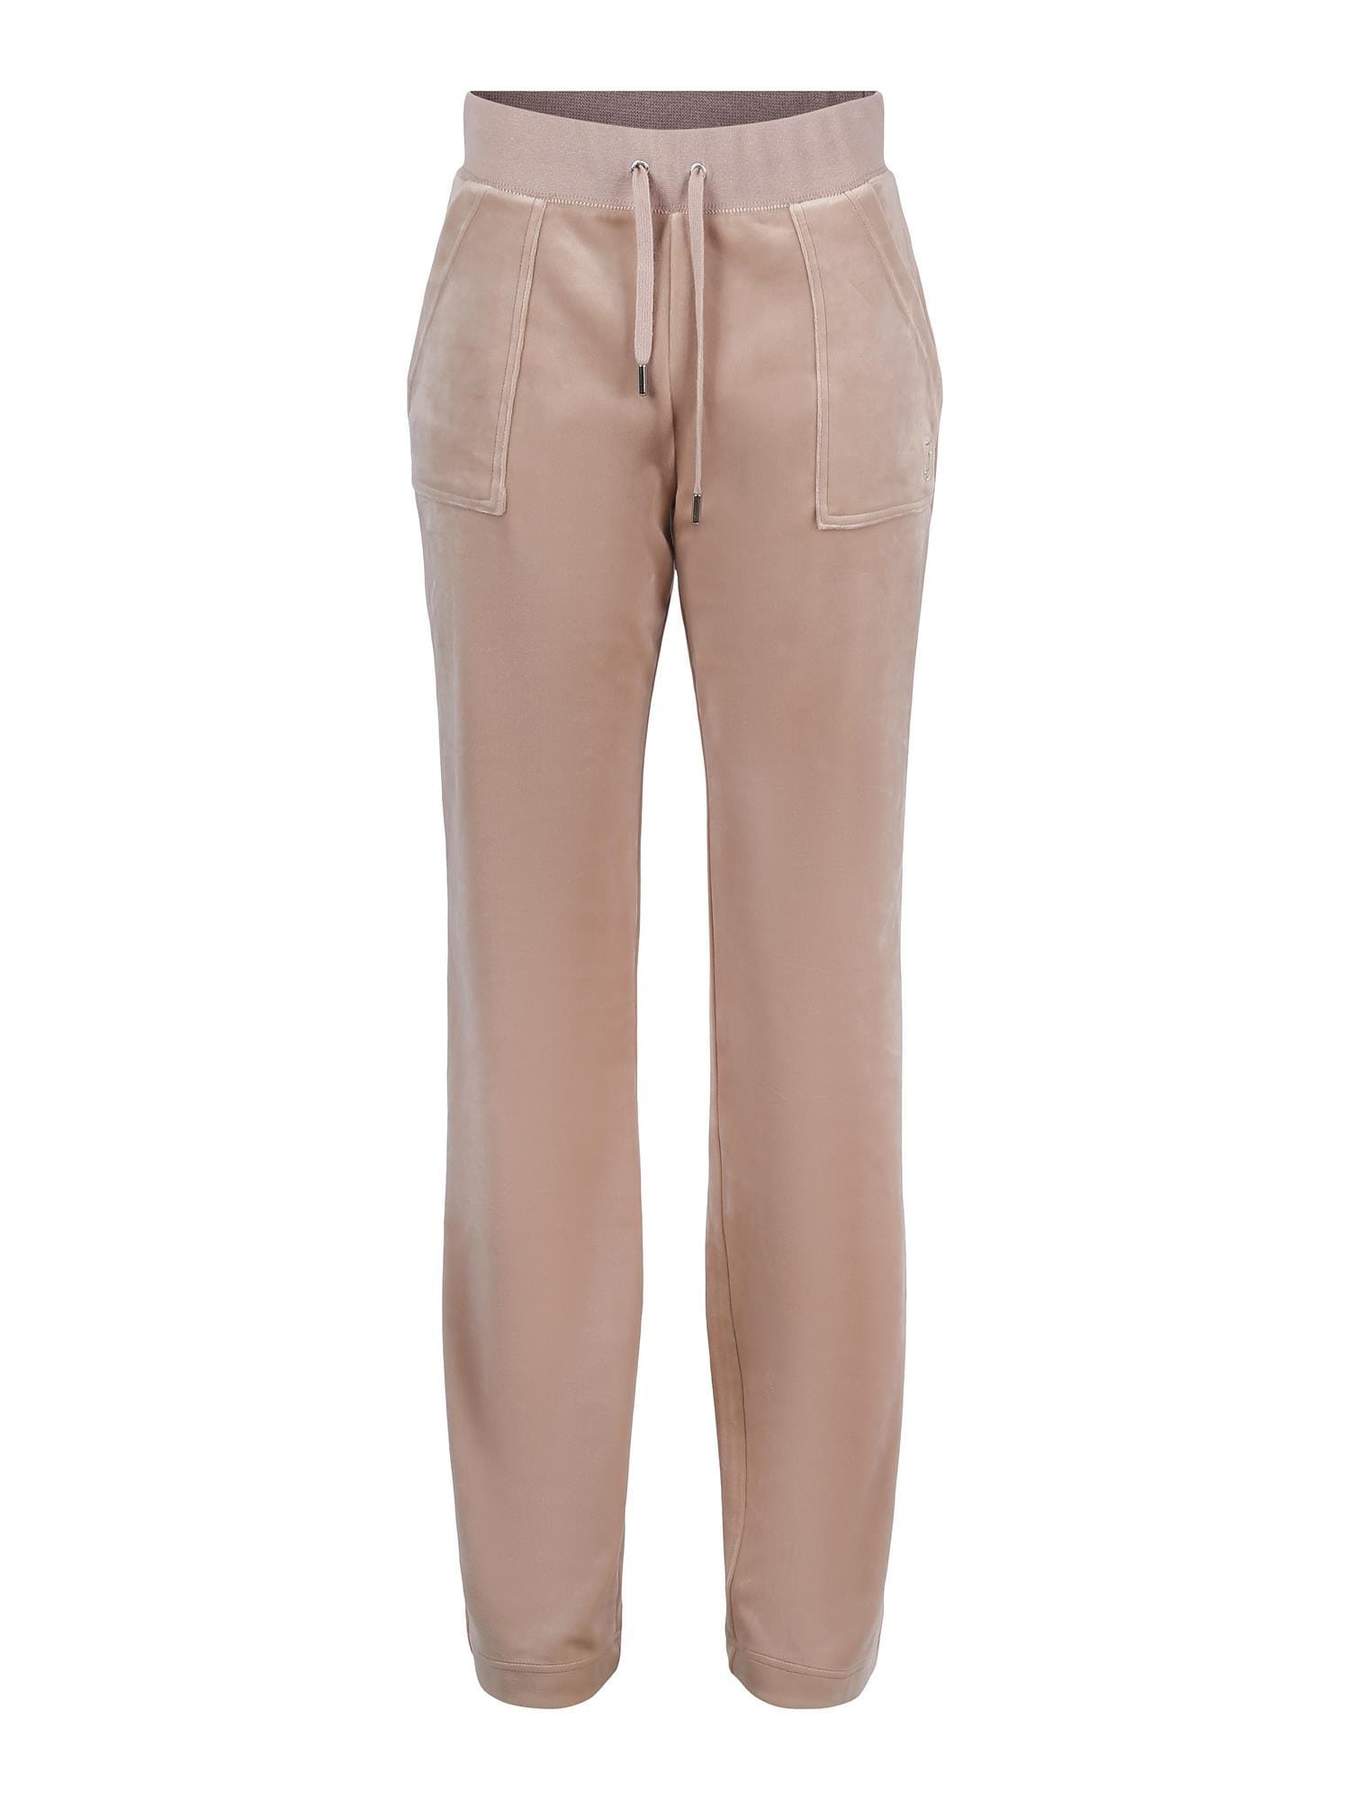 Del Ray Pant Warm Taupe